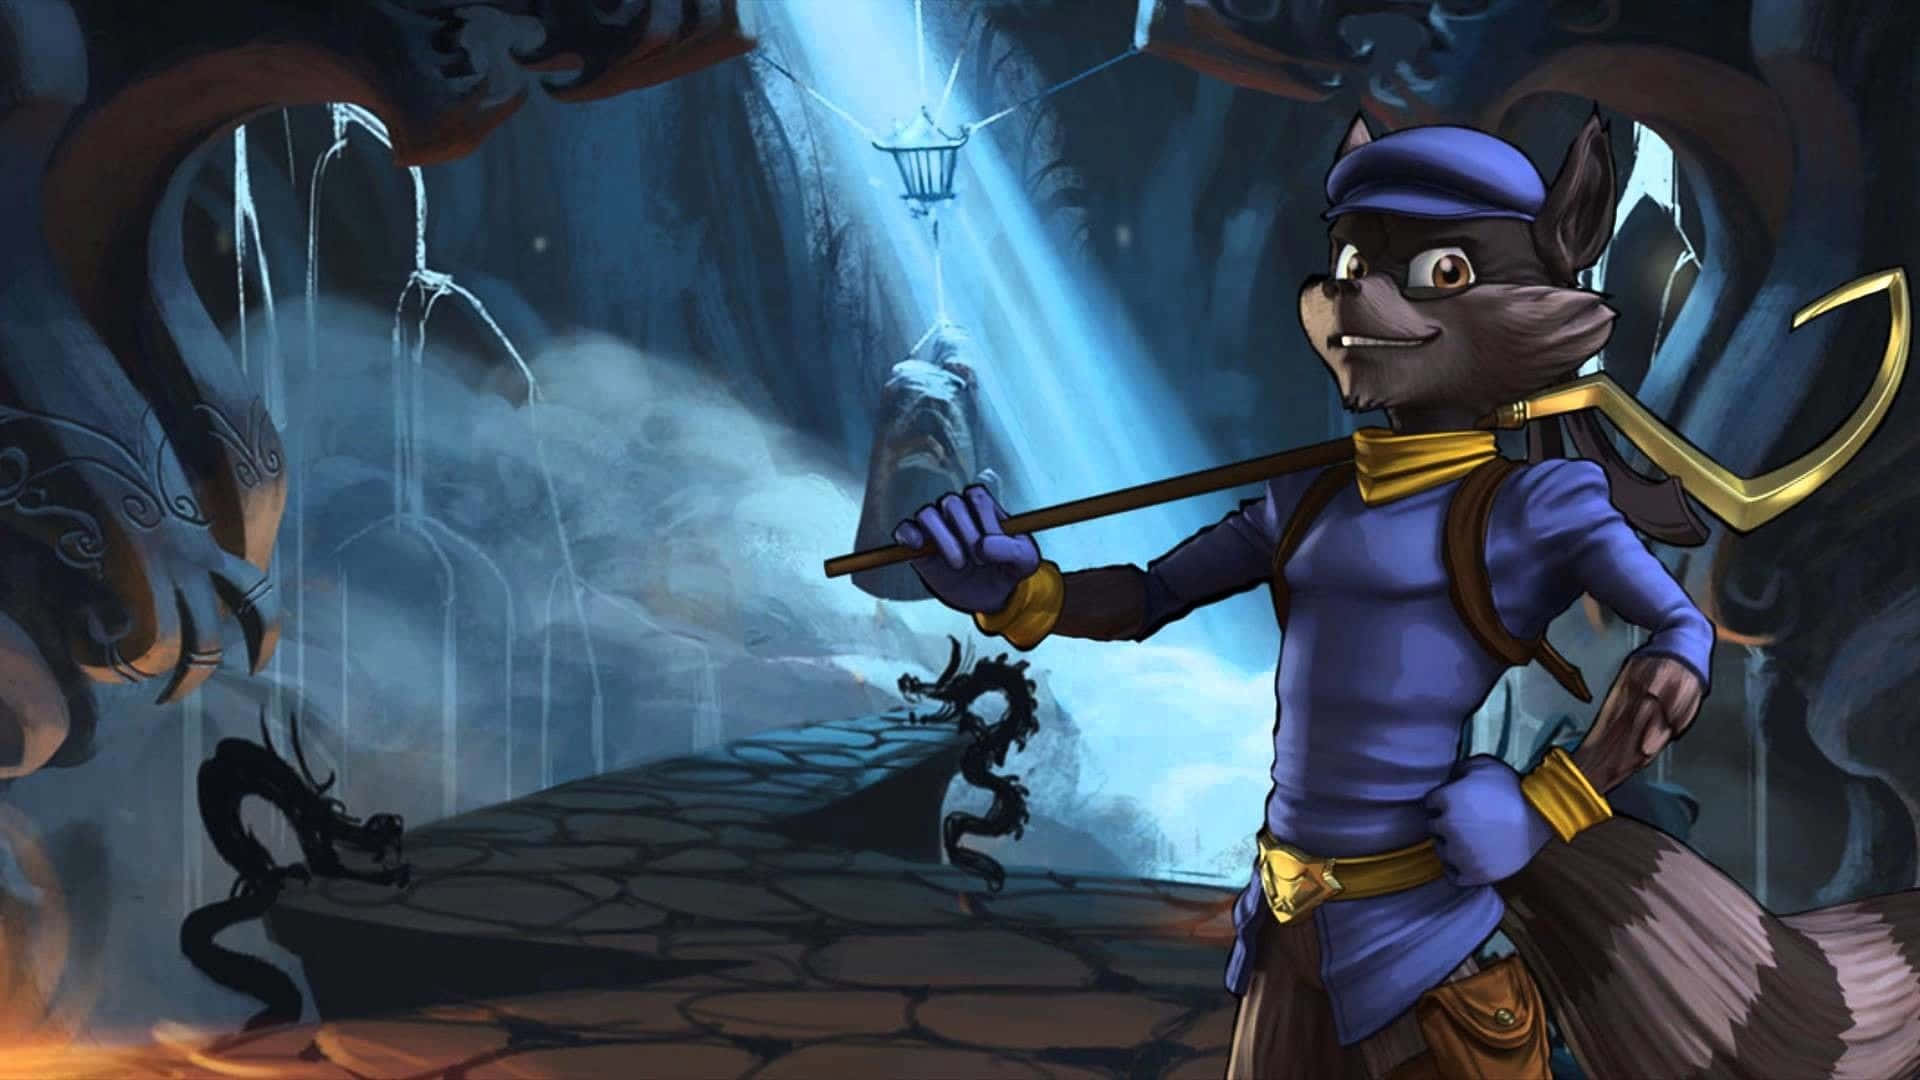 Download Sly Cooper 2 Band Of Thieves Wallpaper